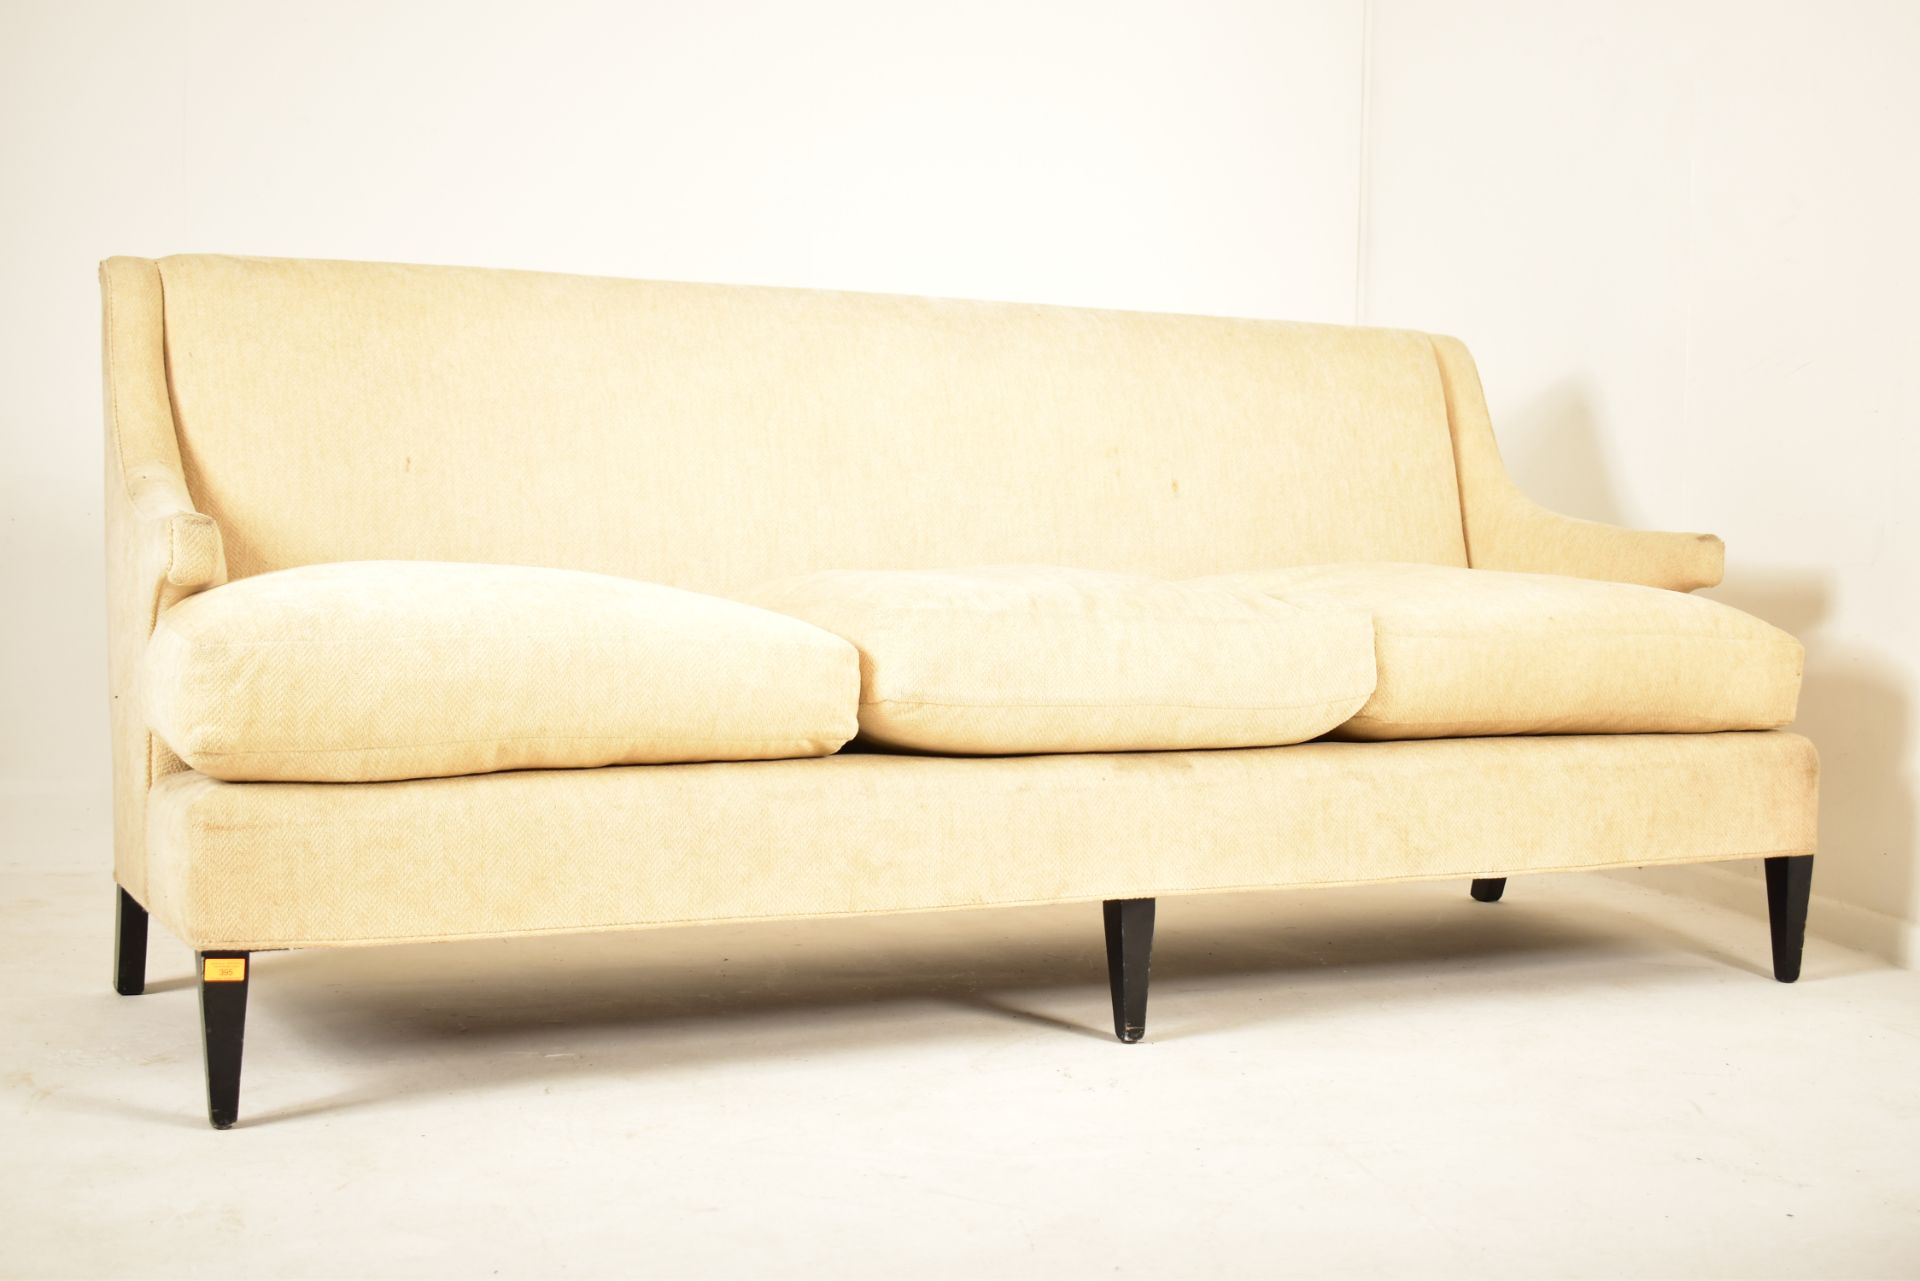 LARGE 20TH CENTURY SOFA IN THE MANNER OF GEORGE SMITH - Image 8 of 8